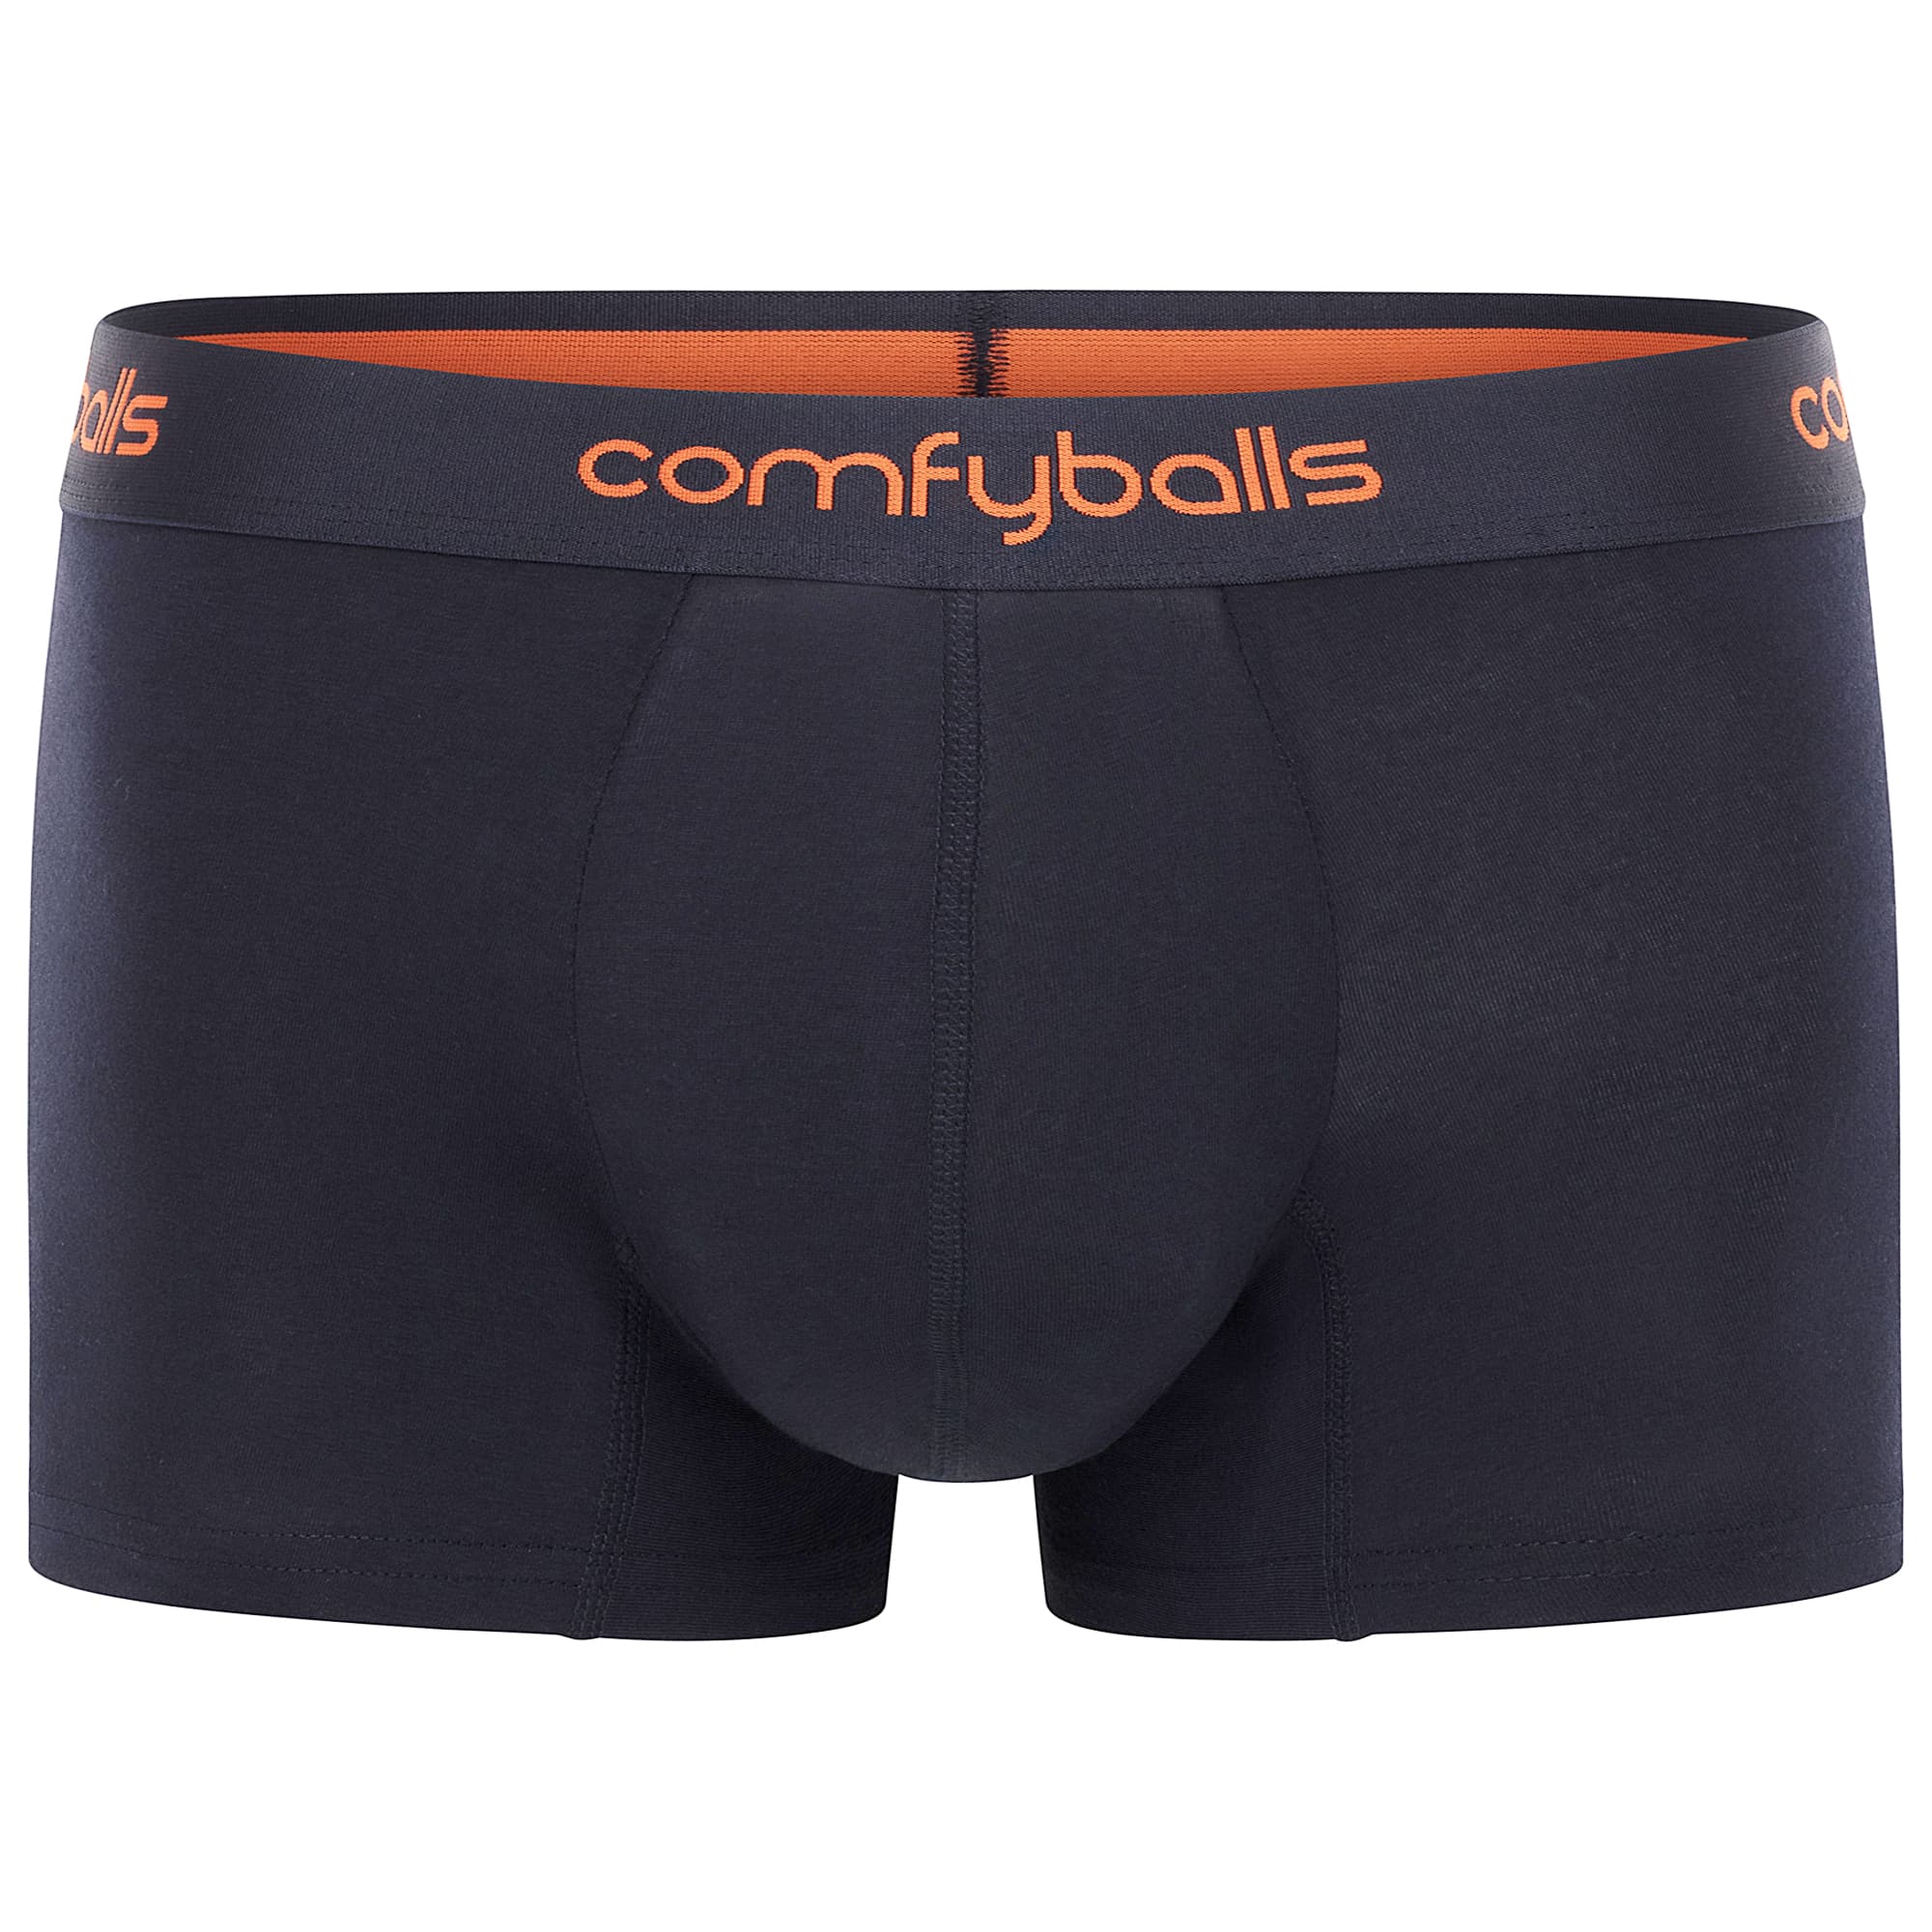 Mens Boxer The Most Comfortable Underwear